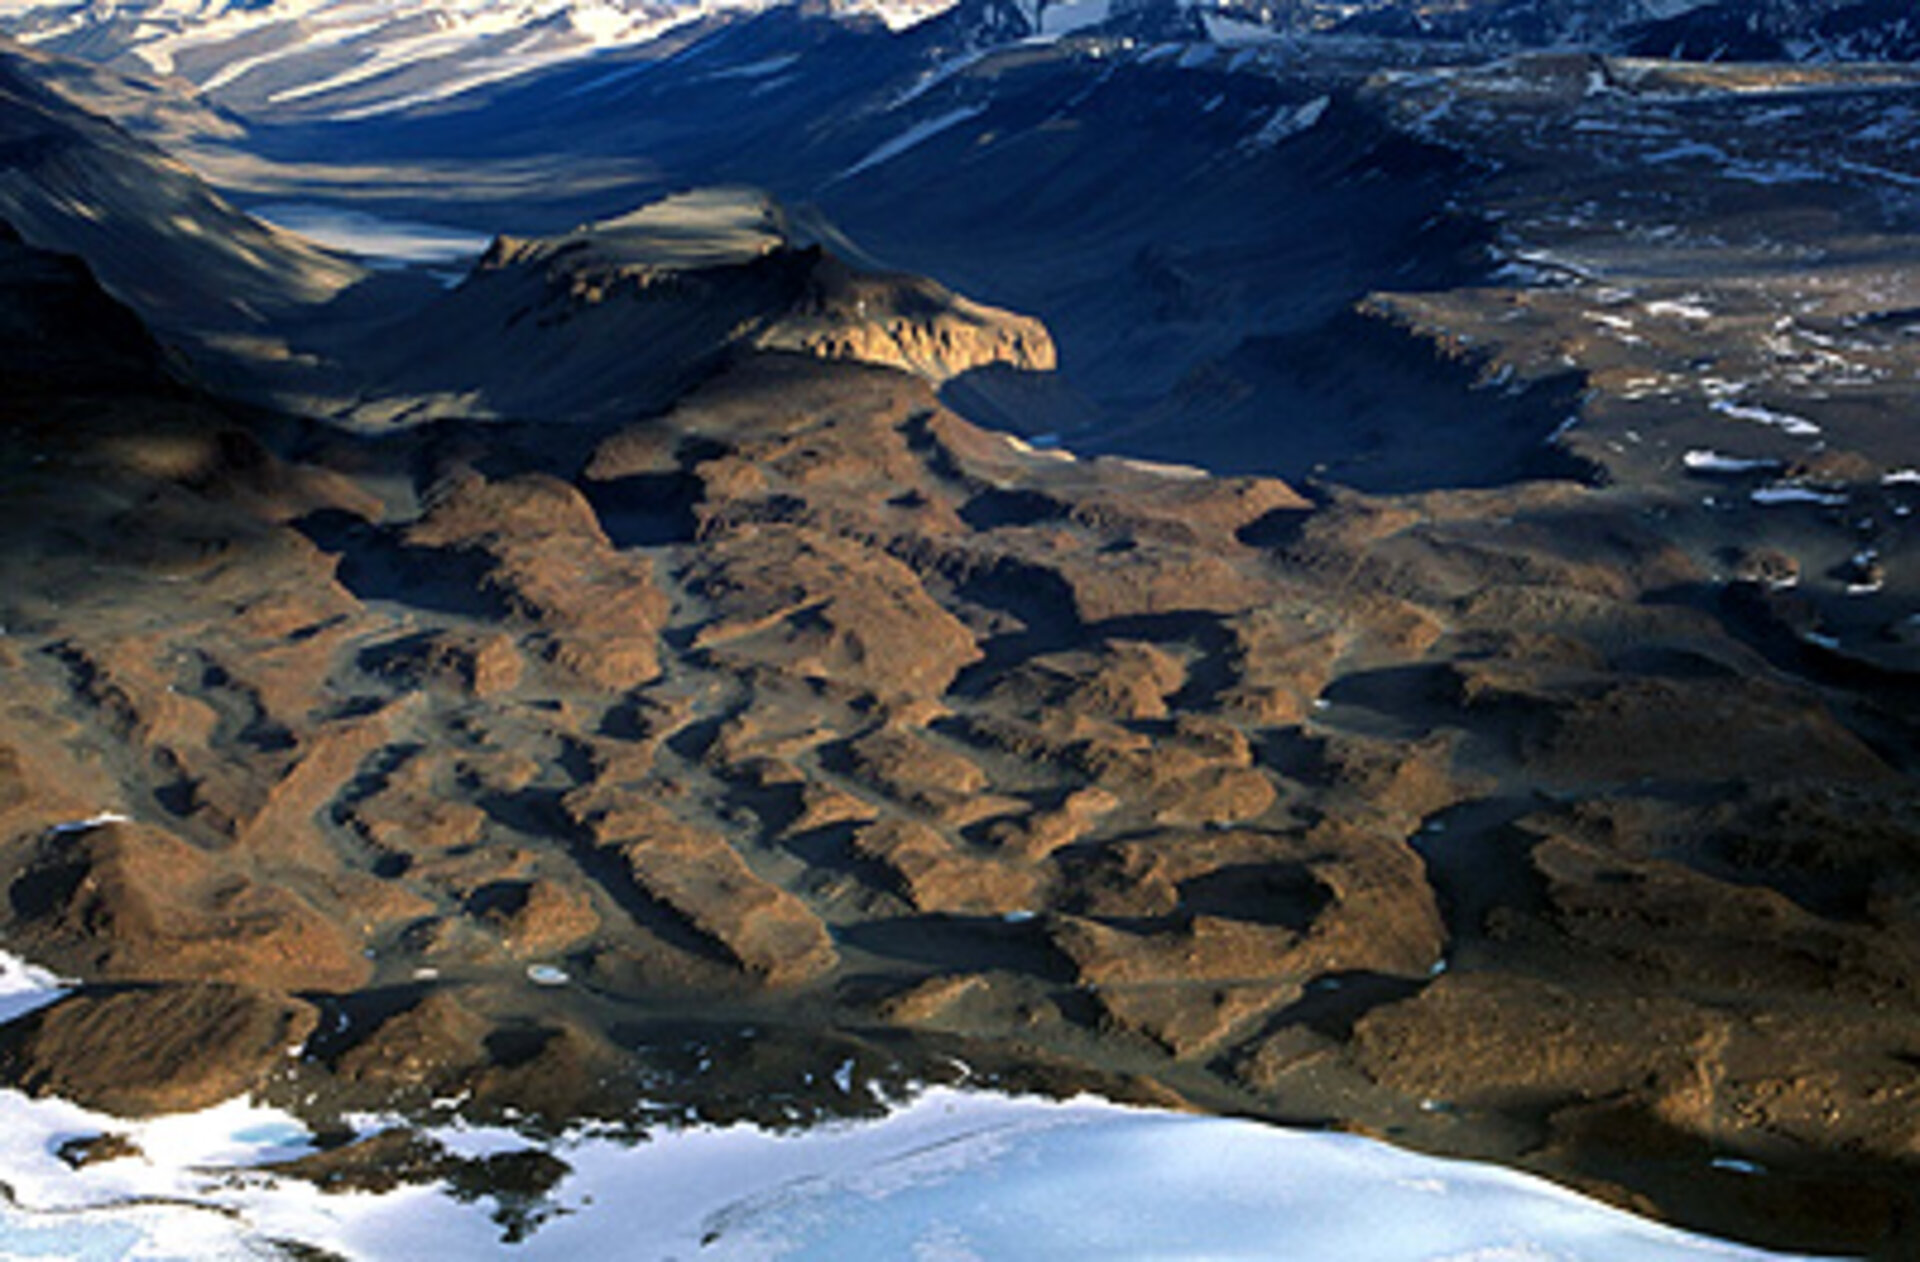 Dry Valleys, Antarctica. The Dry Valleys contain a range of features found on Mars in the past and today.